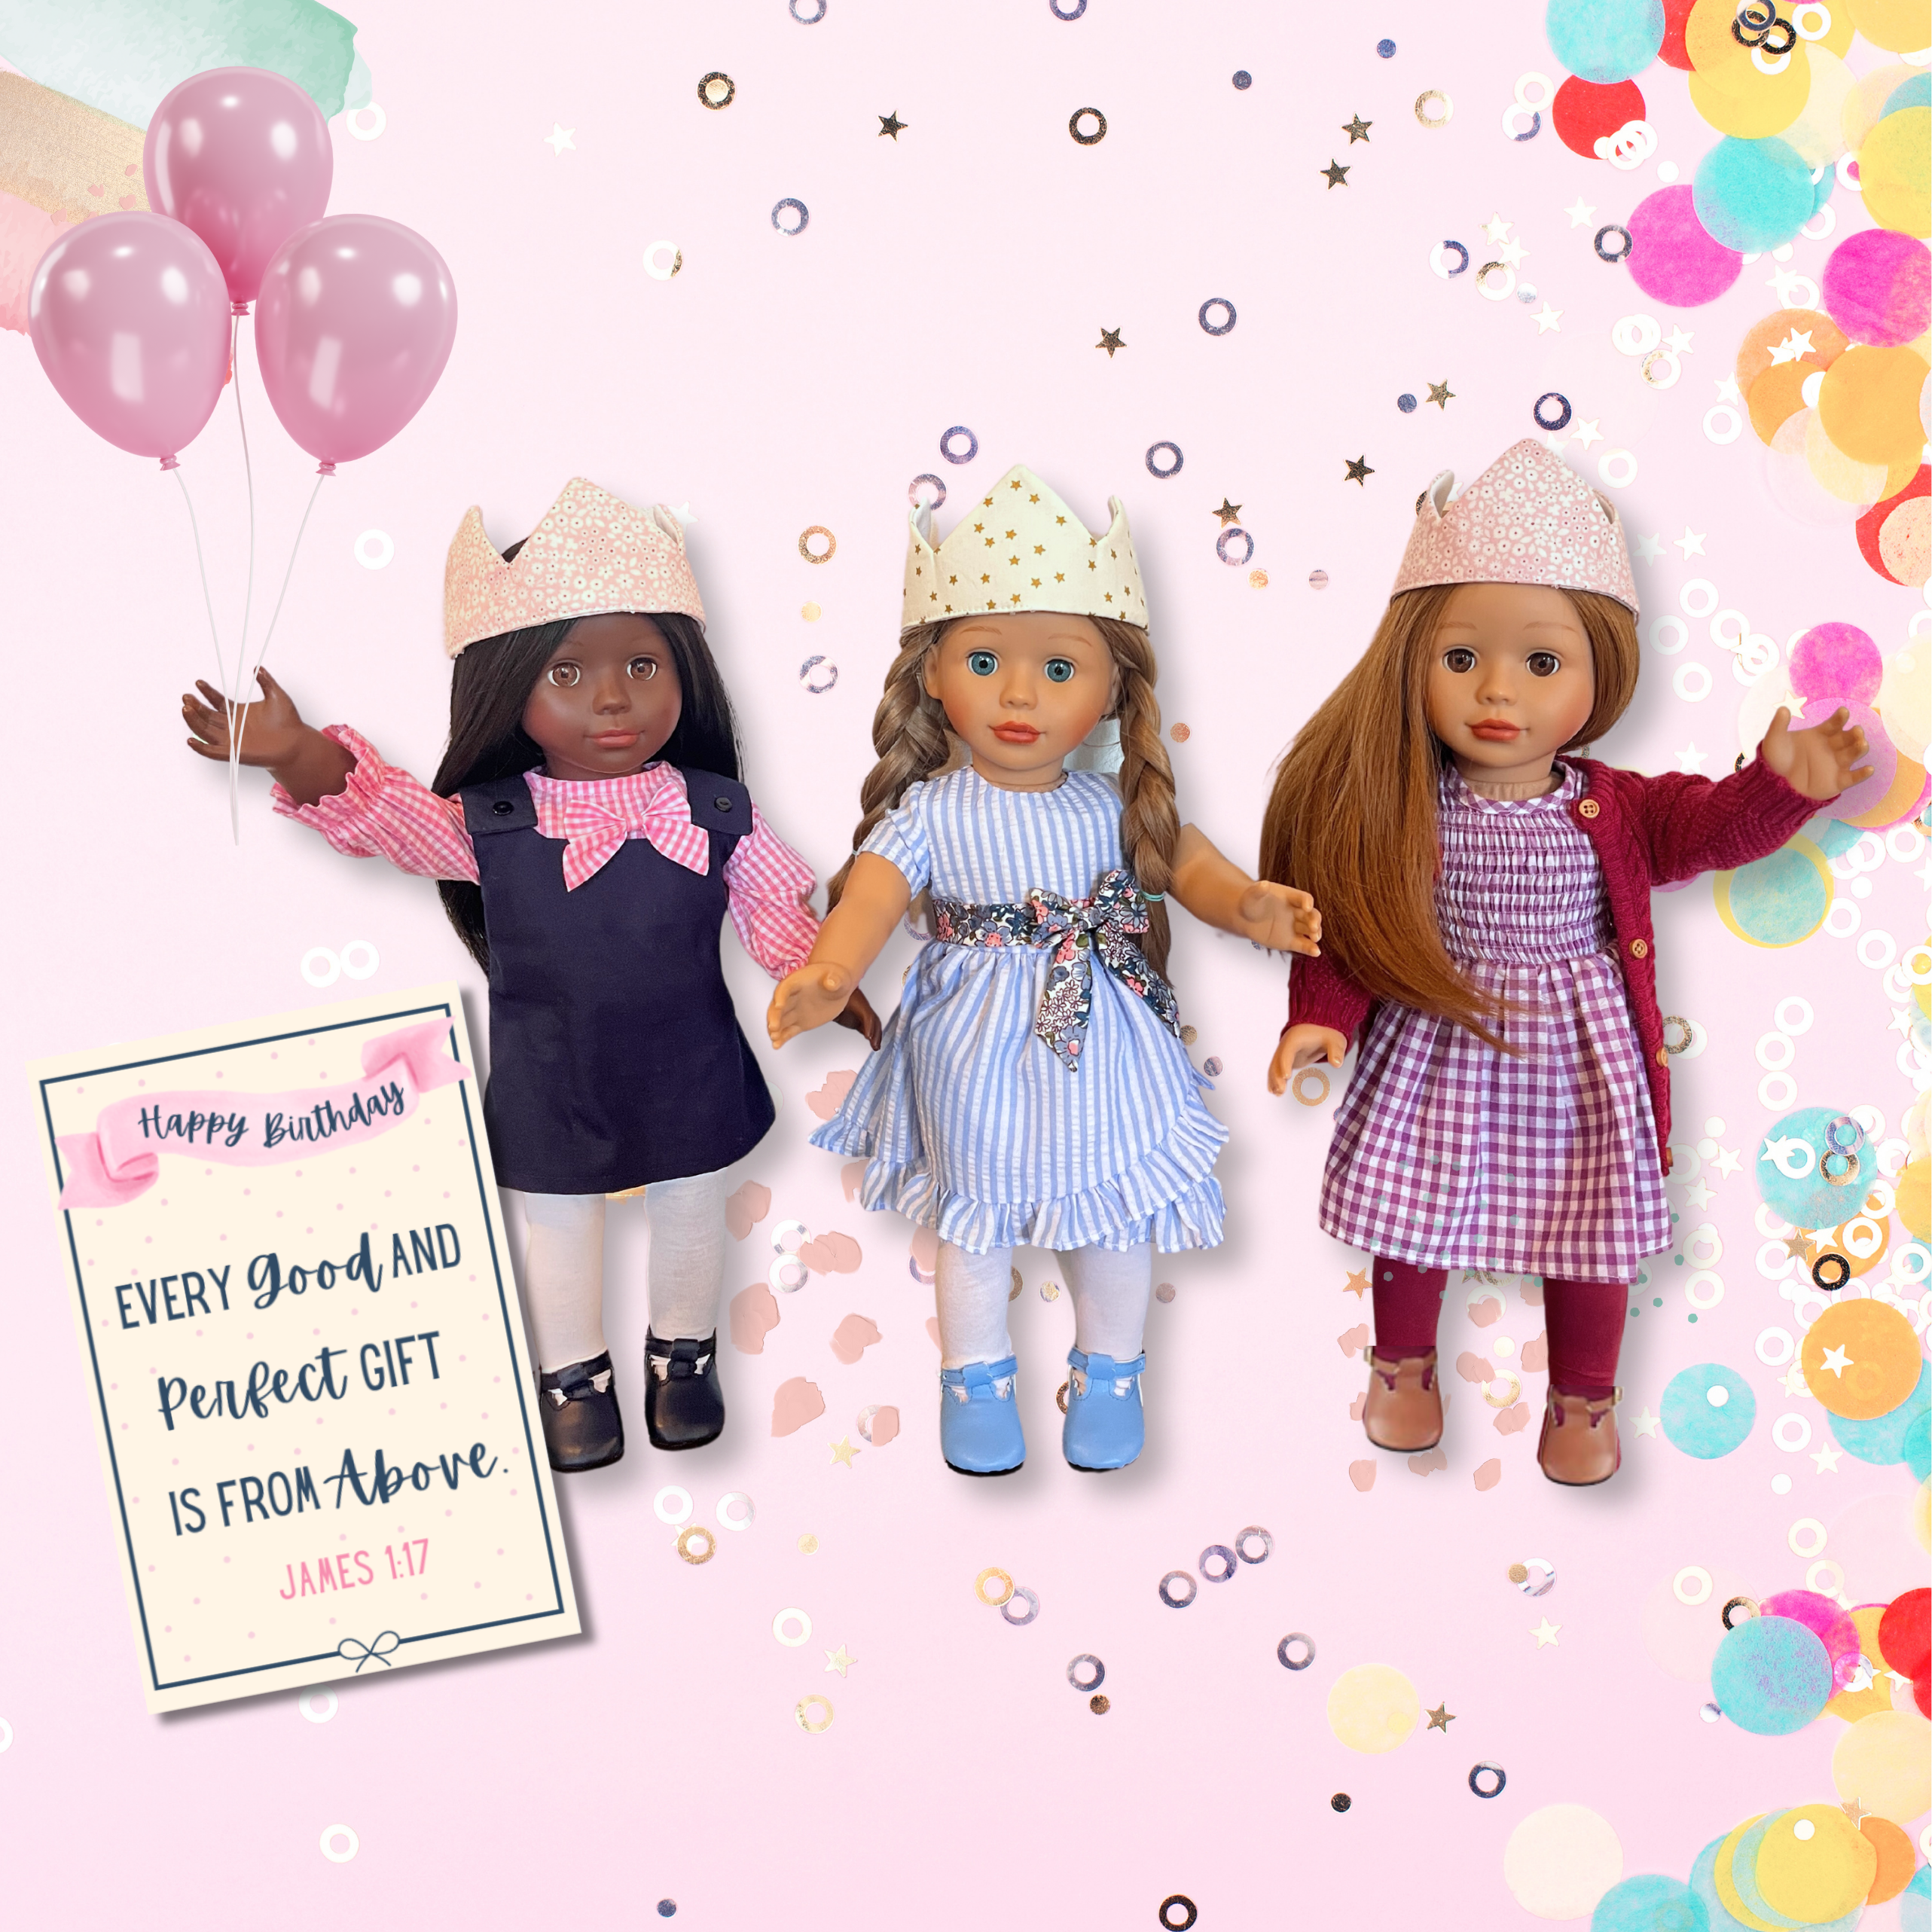 Celebrate her birthday with matching girl & doll crowns.